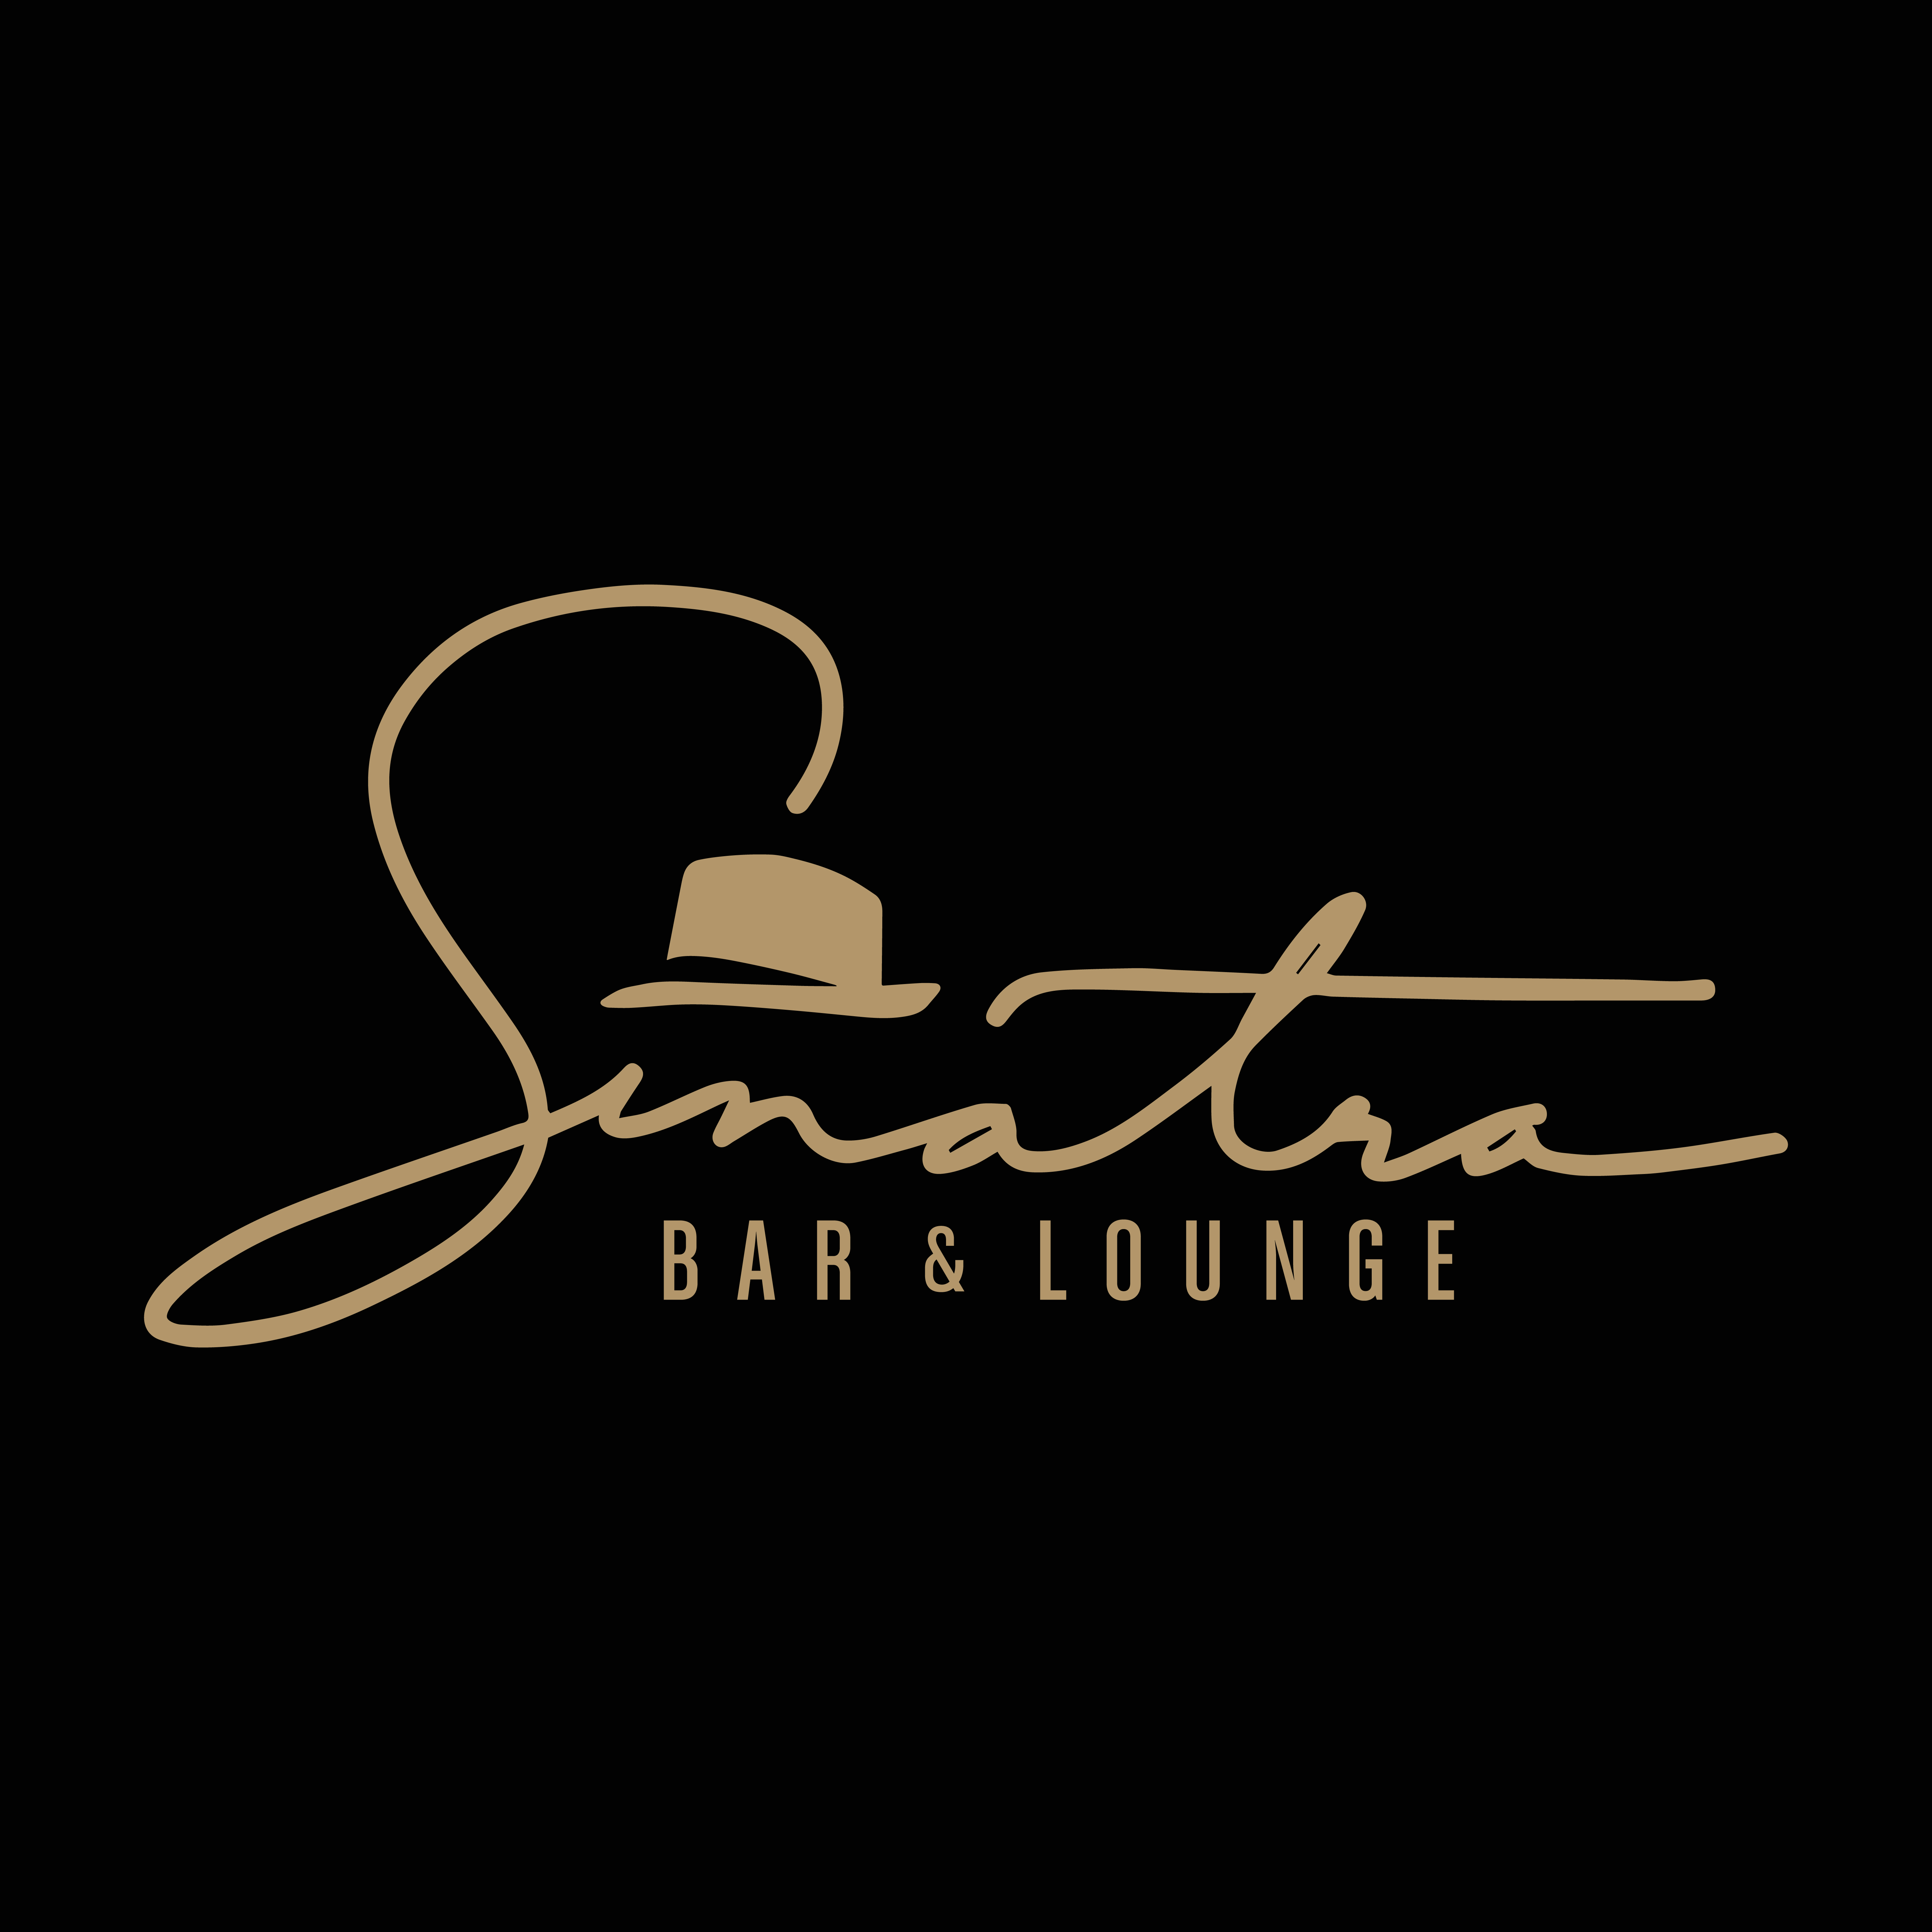 ICON ENTERTAINMENT GROUP ANNOUNCES APRIL 14 GRAND OPENING OF HIGHLY ANTICIPATED SINATRA BAR & LOUNGE